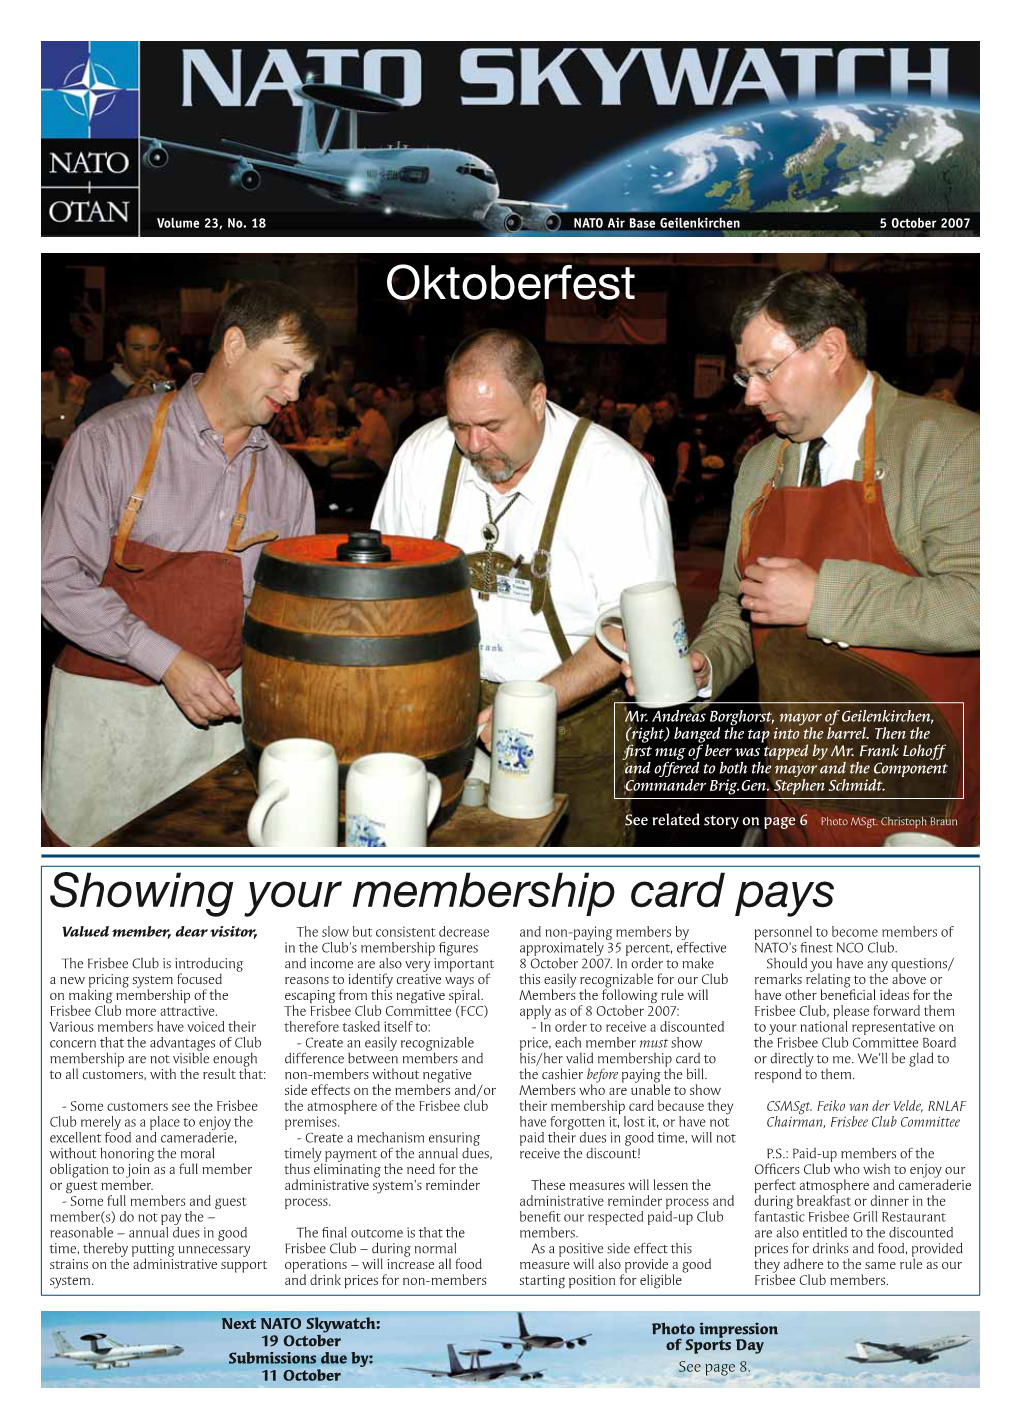 Oktoberfest Showing Your Membership Card Pays